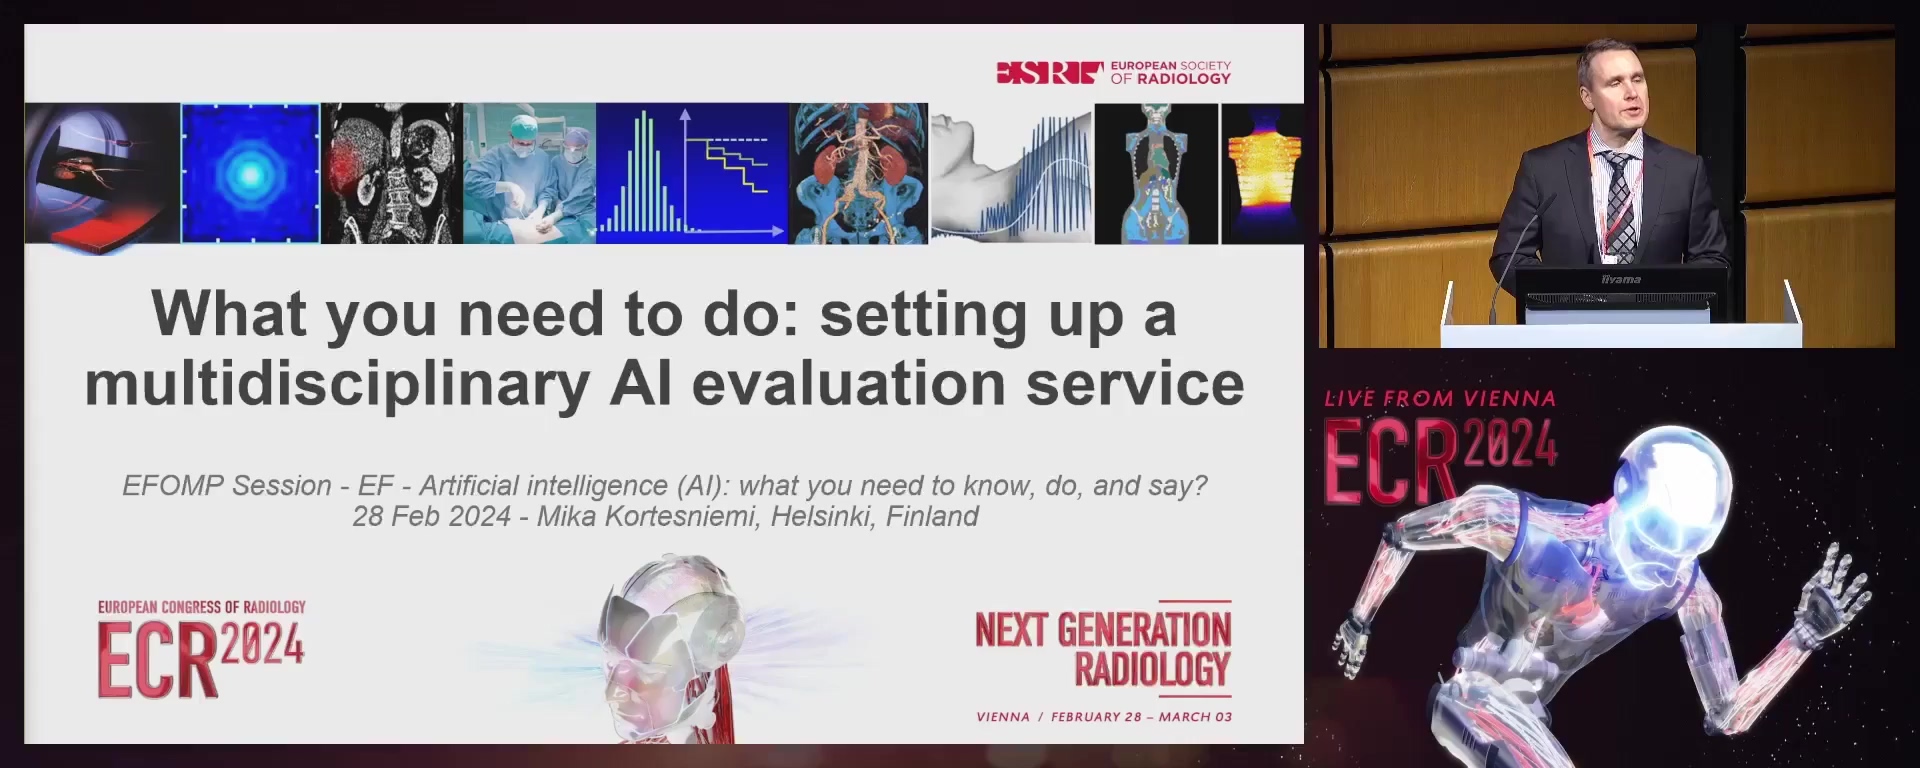 What you need to do: setting up a multidisciplinary AI evaluation service